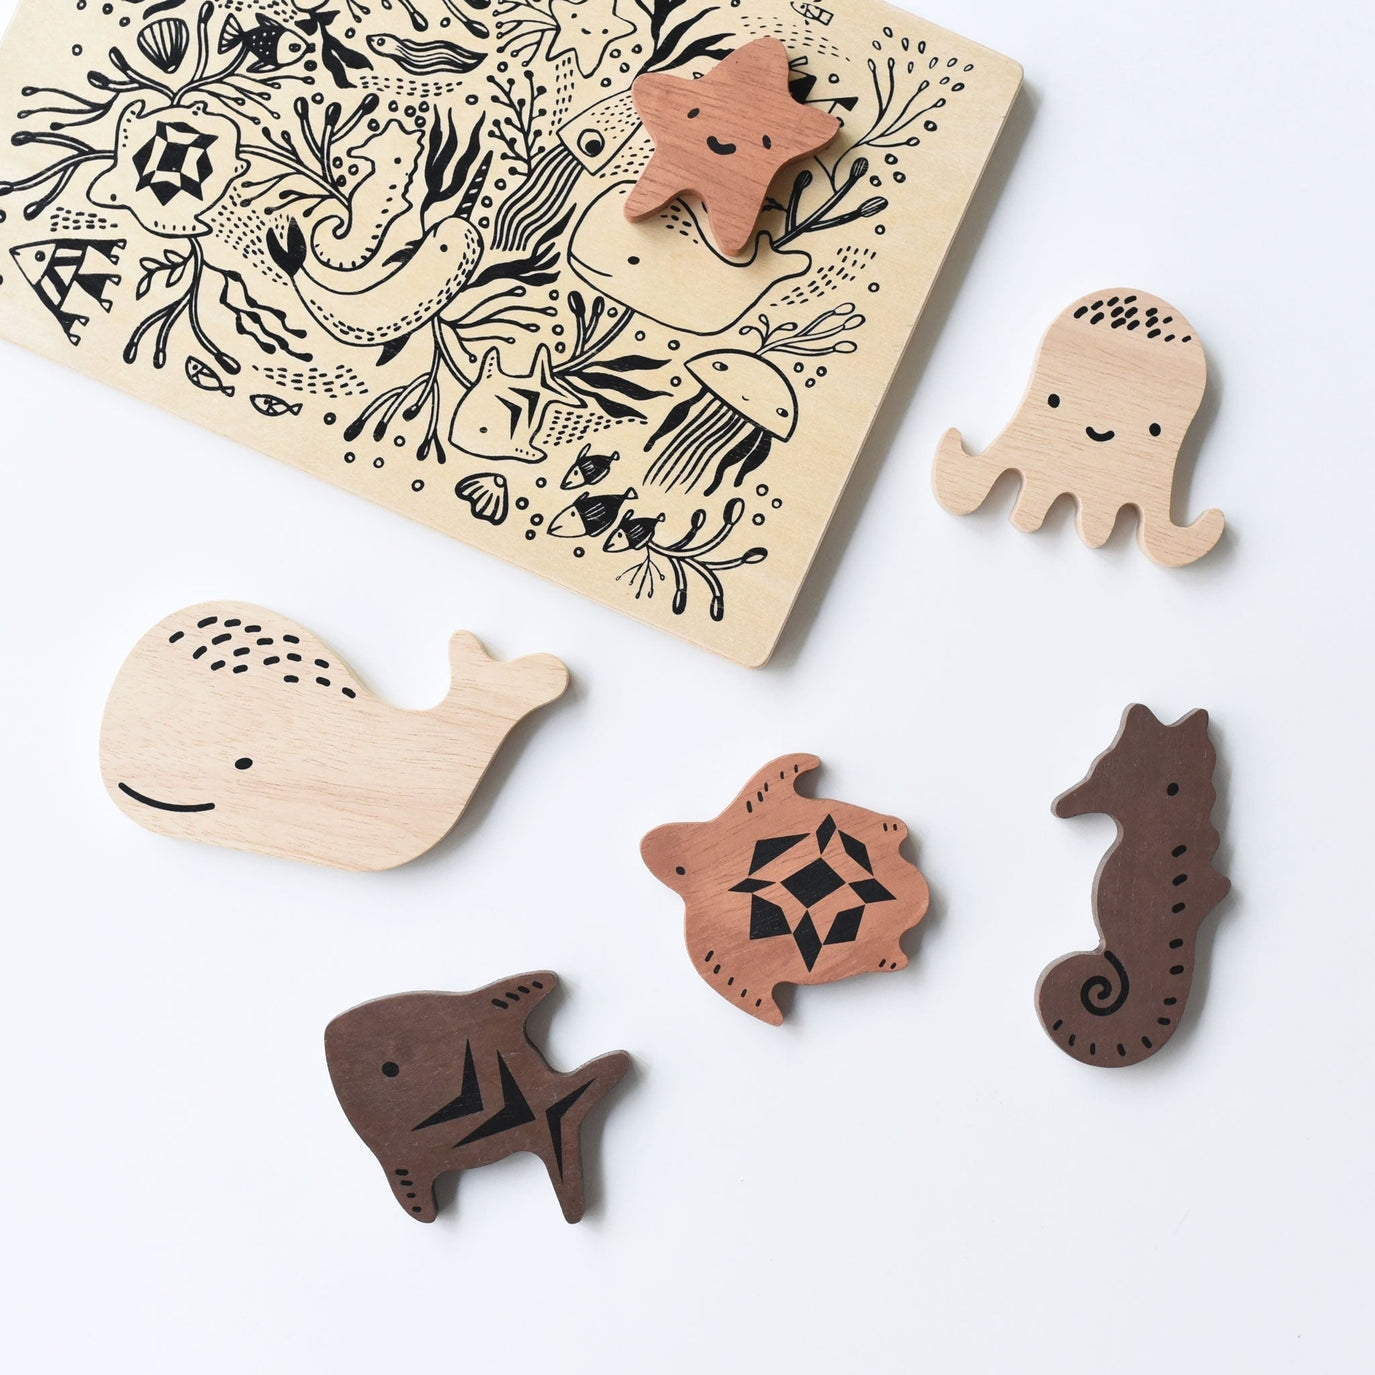 Sea Life Wooden Puzzle wee gallery